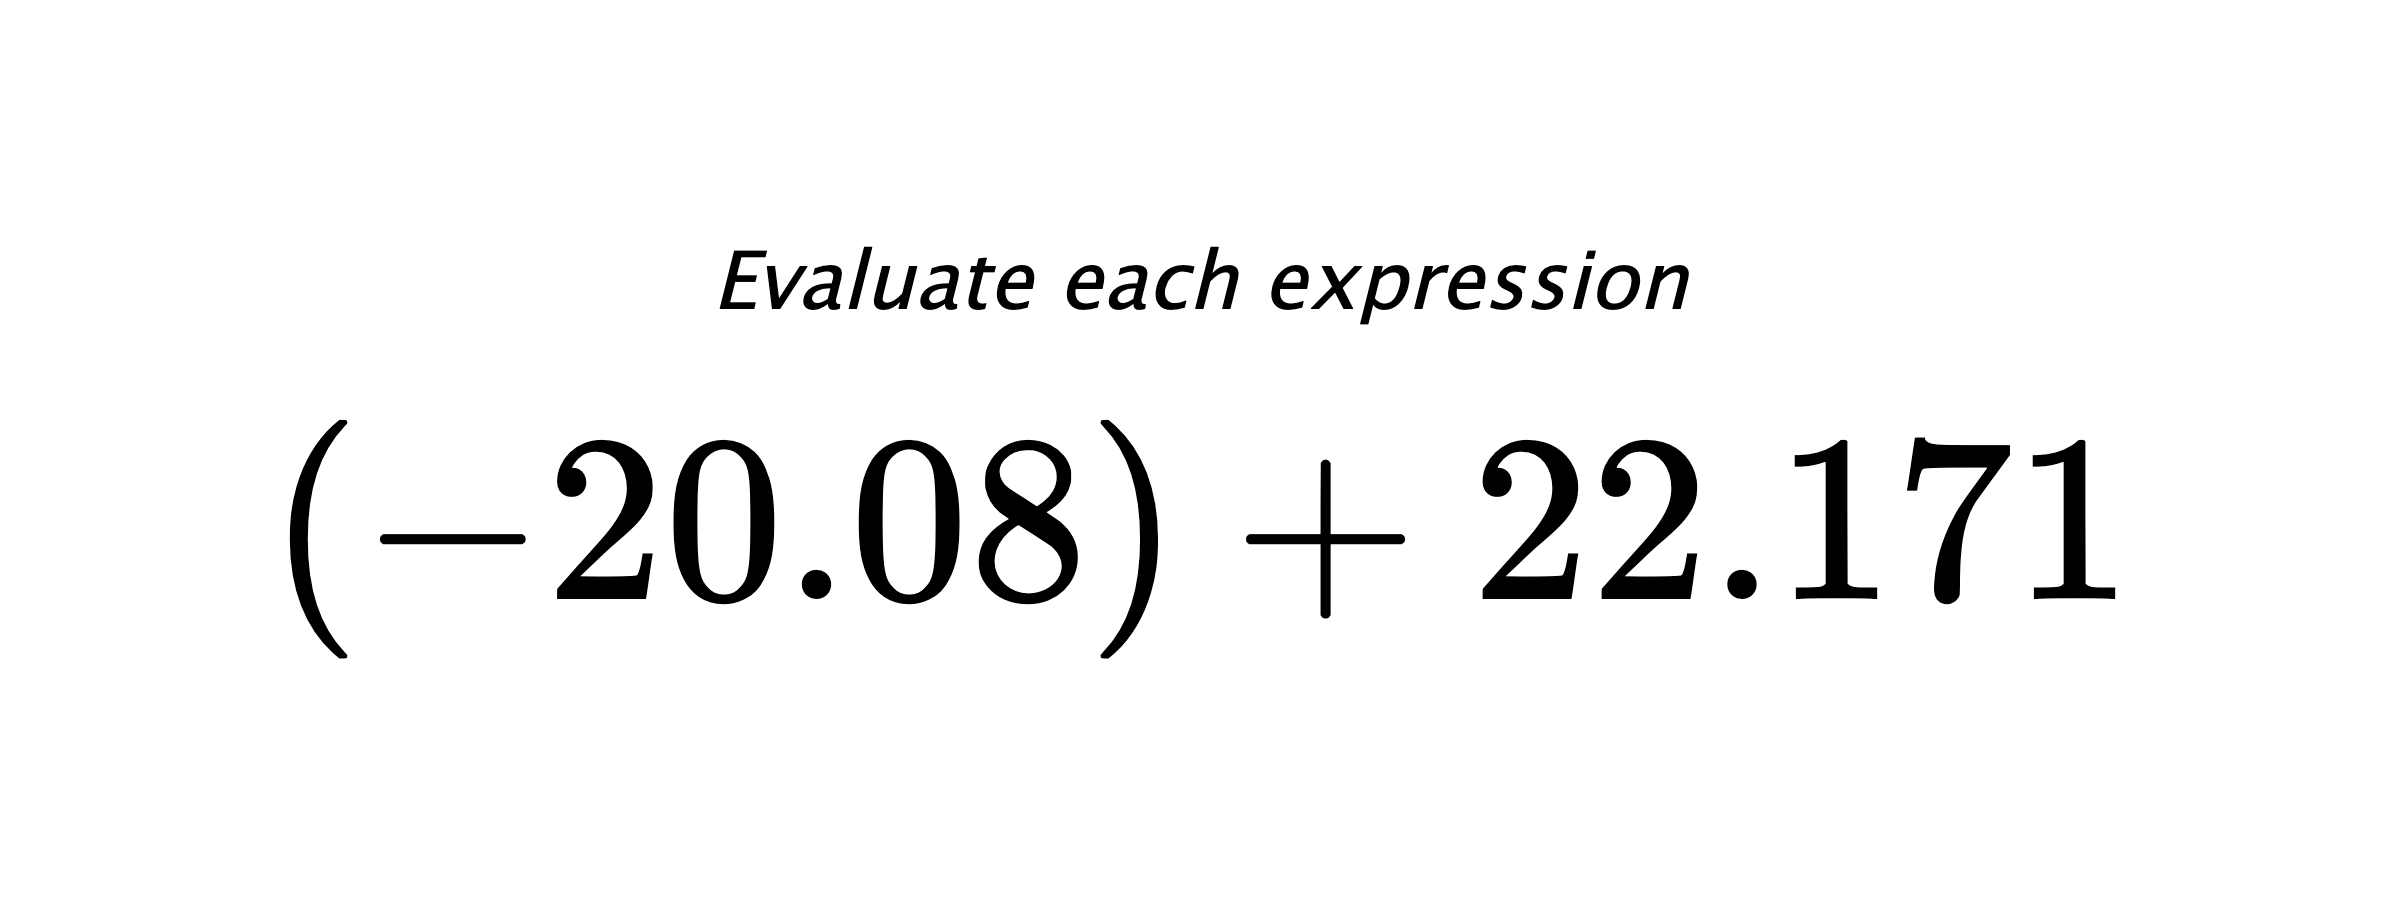 Evaluate each expression $ (-20.08)+22.171 $